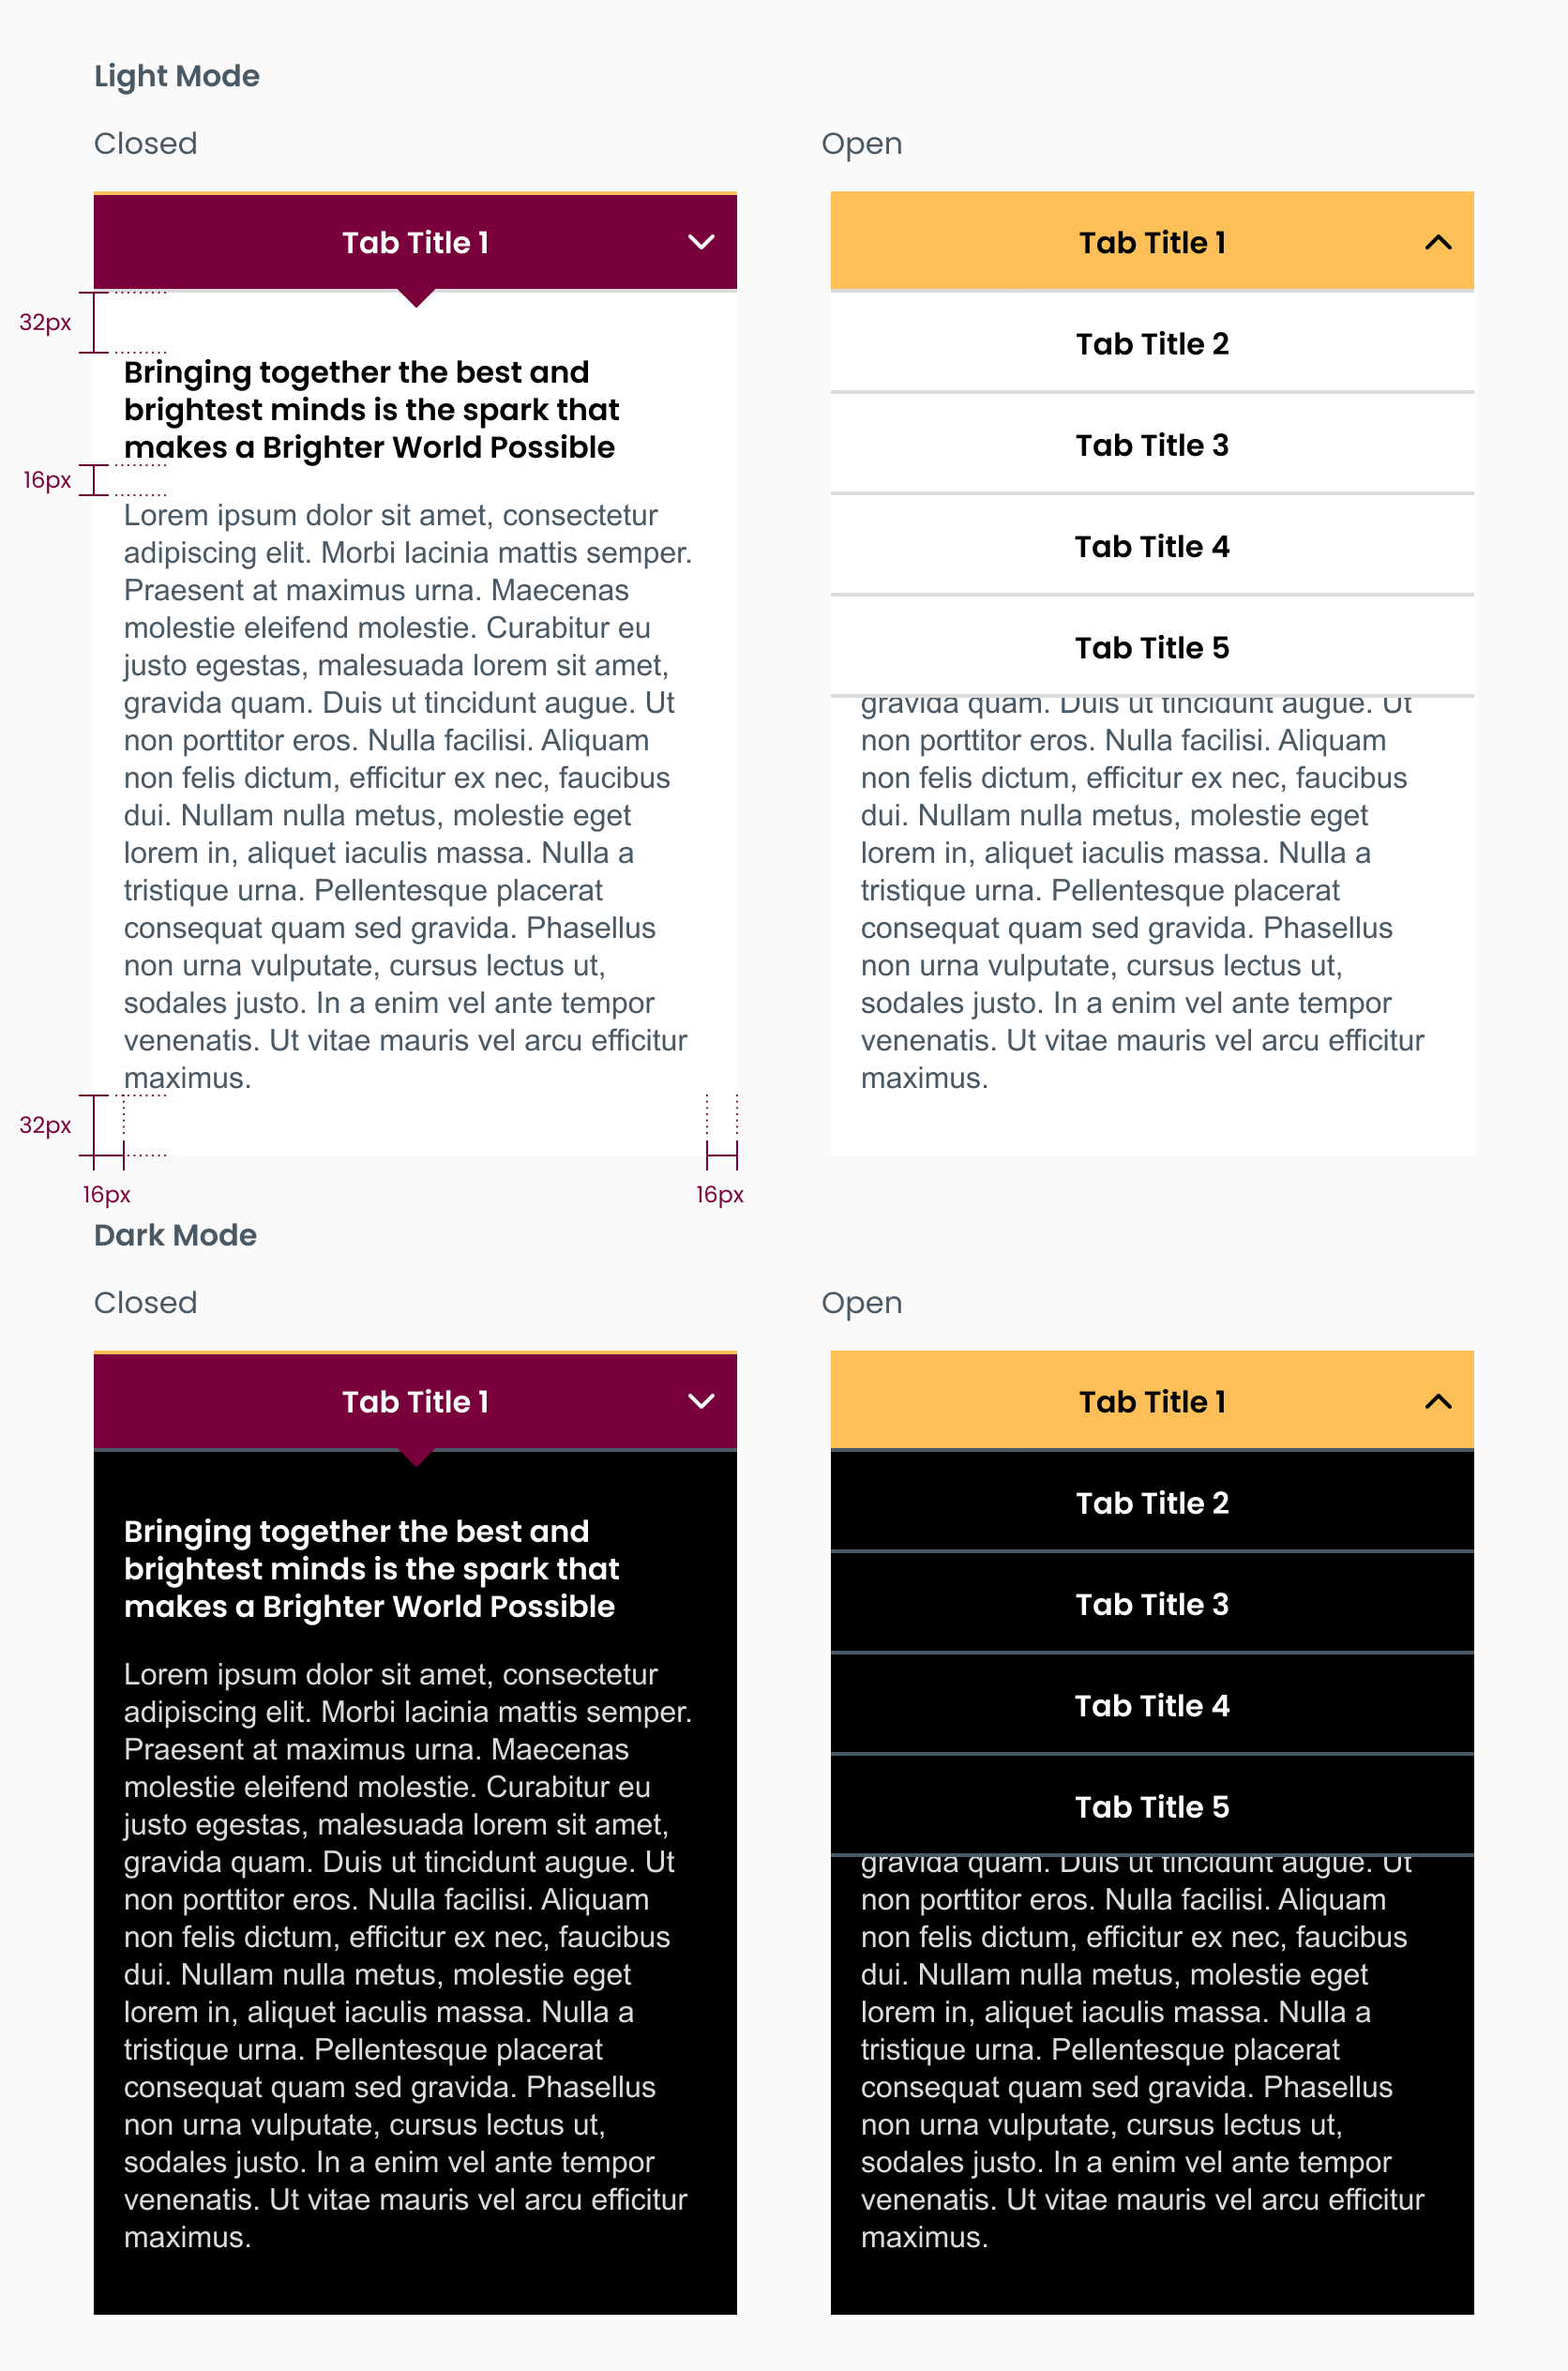 A diagram showing how tabs look in light and dark mode on mobile. mobile tabs: 32px of spacing between tab title and content of tab, 16px of space between content header and content body, 32px between content body and edge of screen, 16px left and right margins